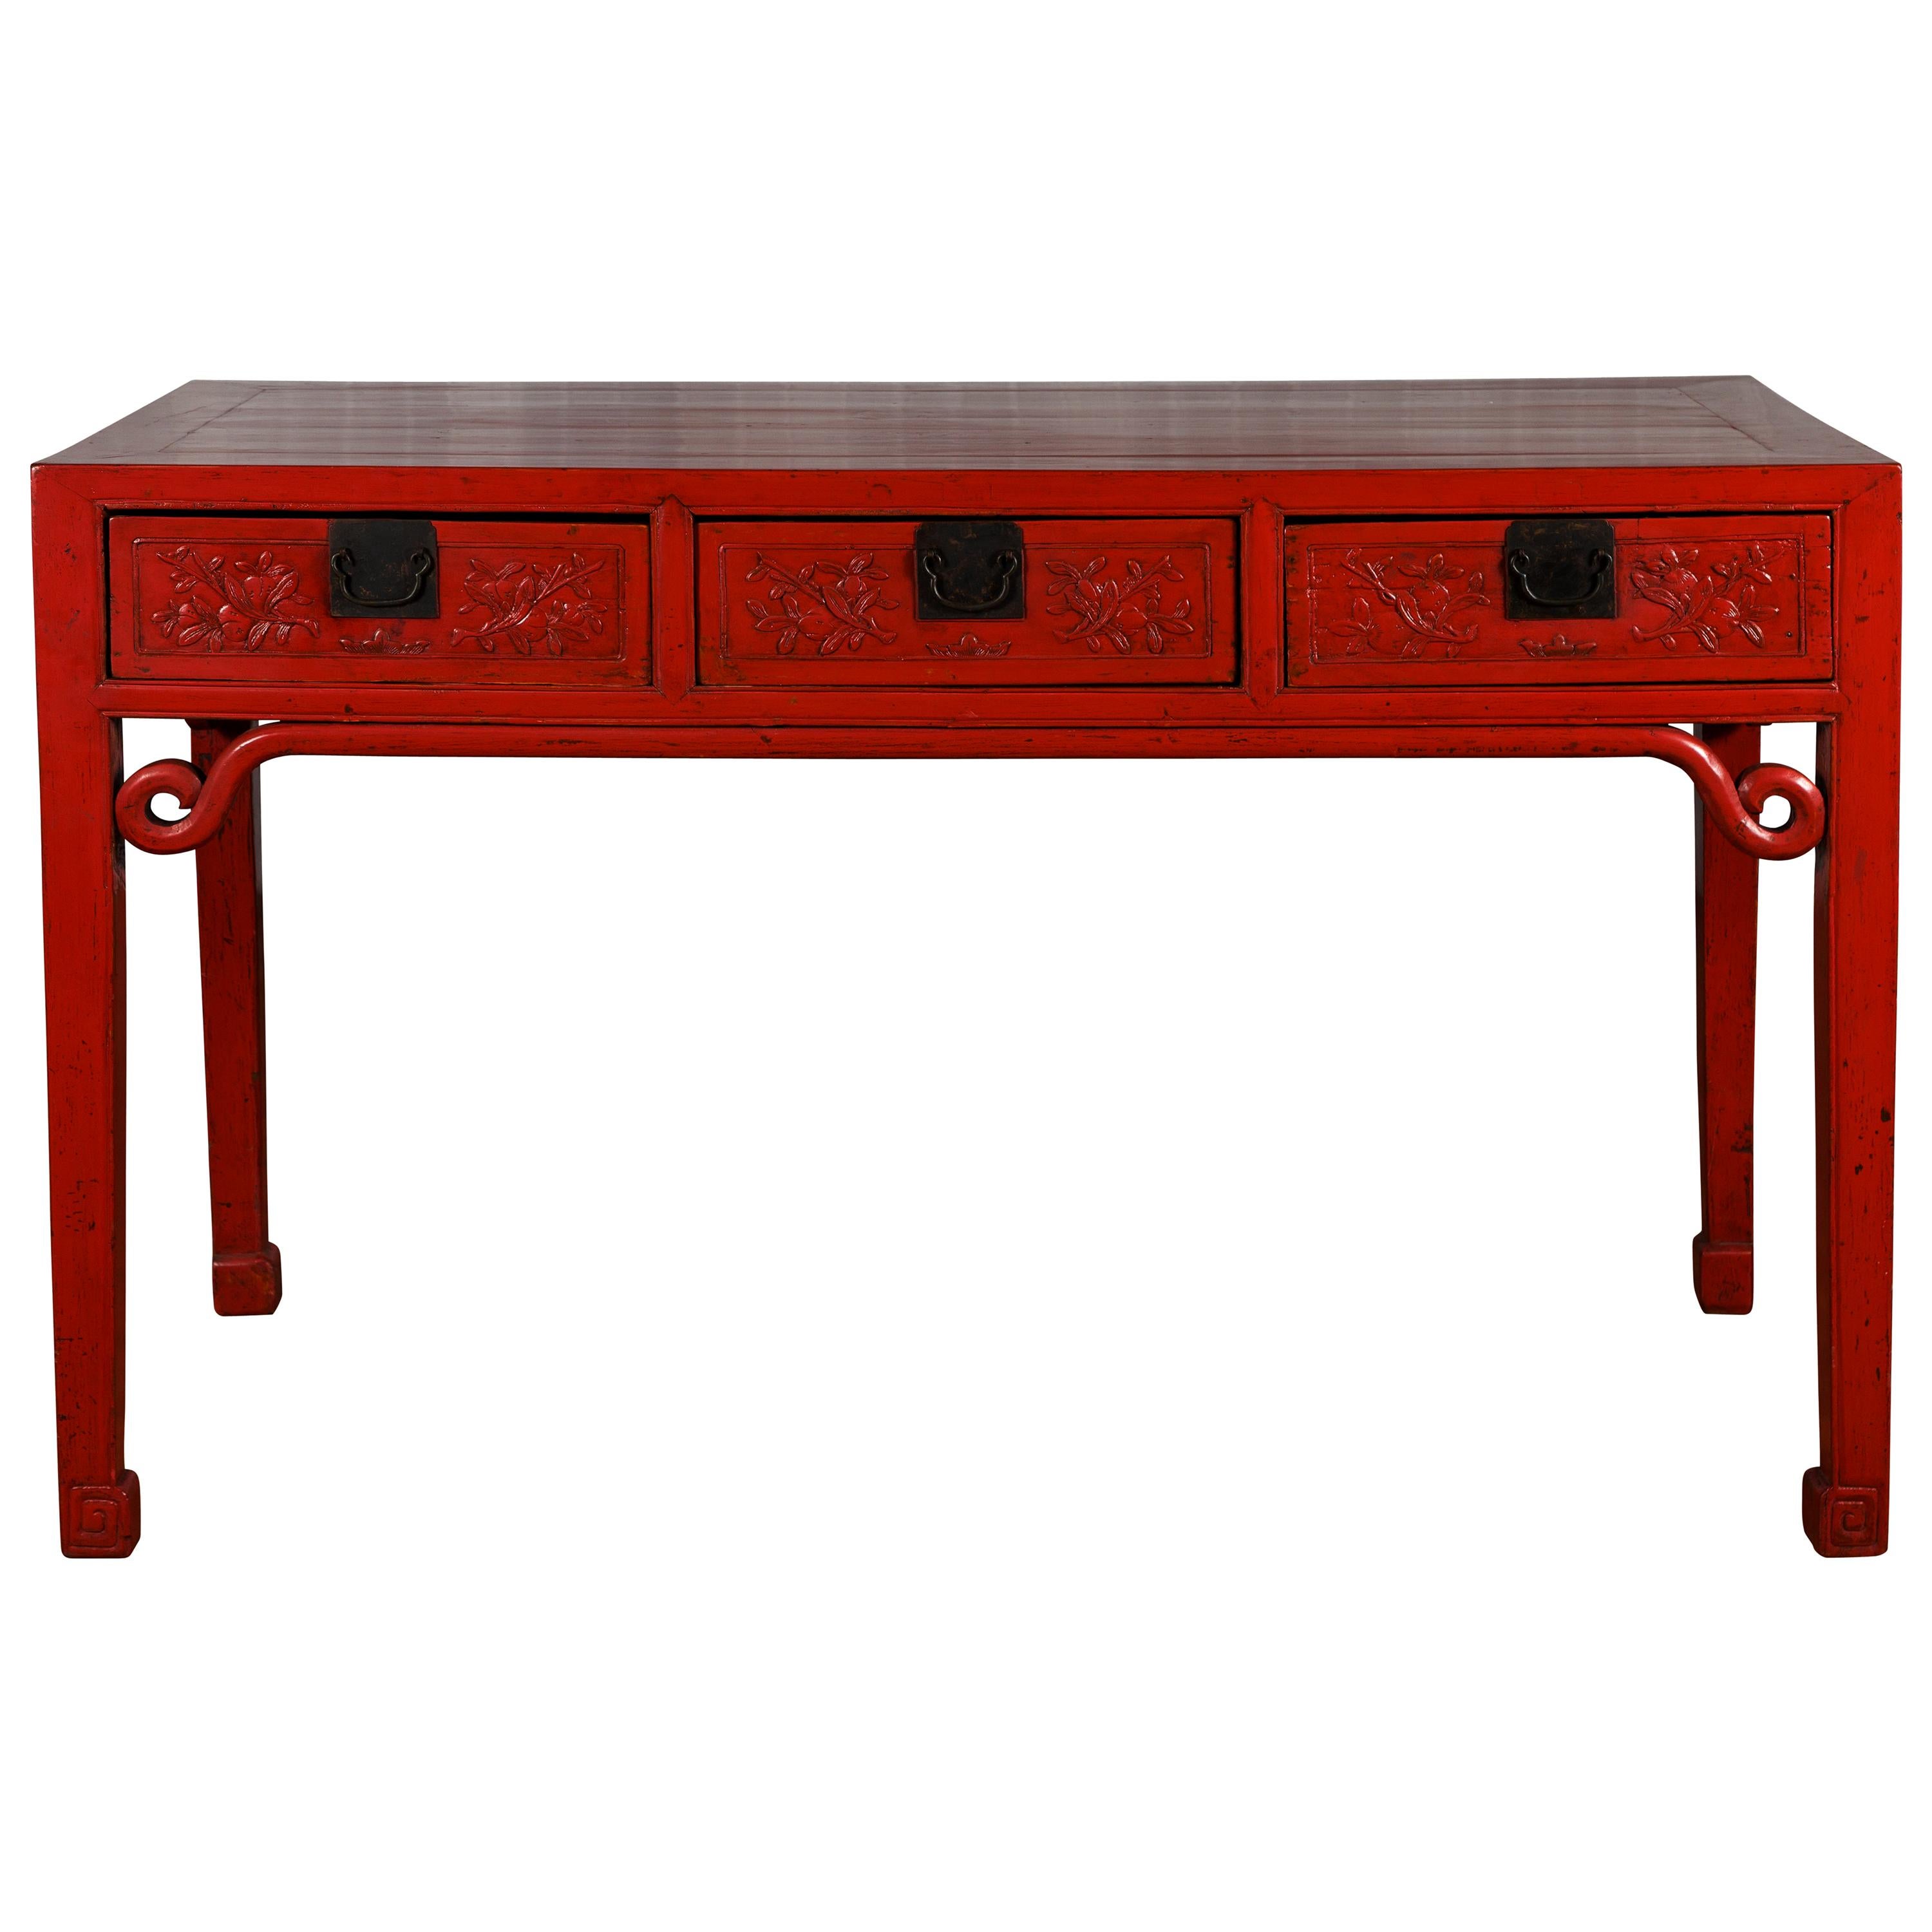 Chinese Qing Dynasty 19th Century Red Lacquered Desk with Floral Carved Drawers